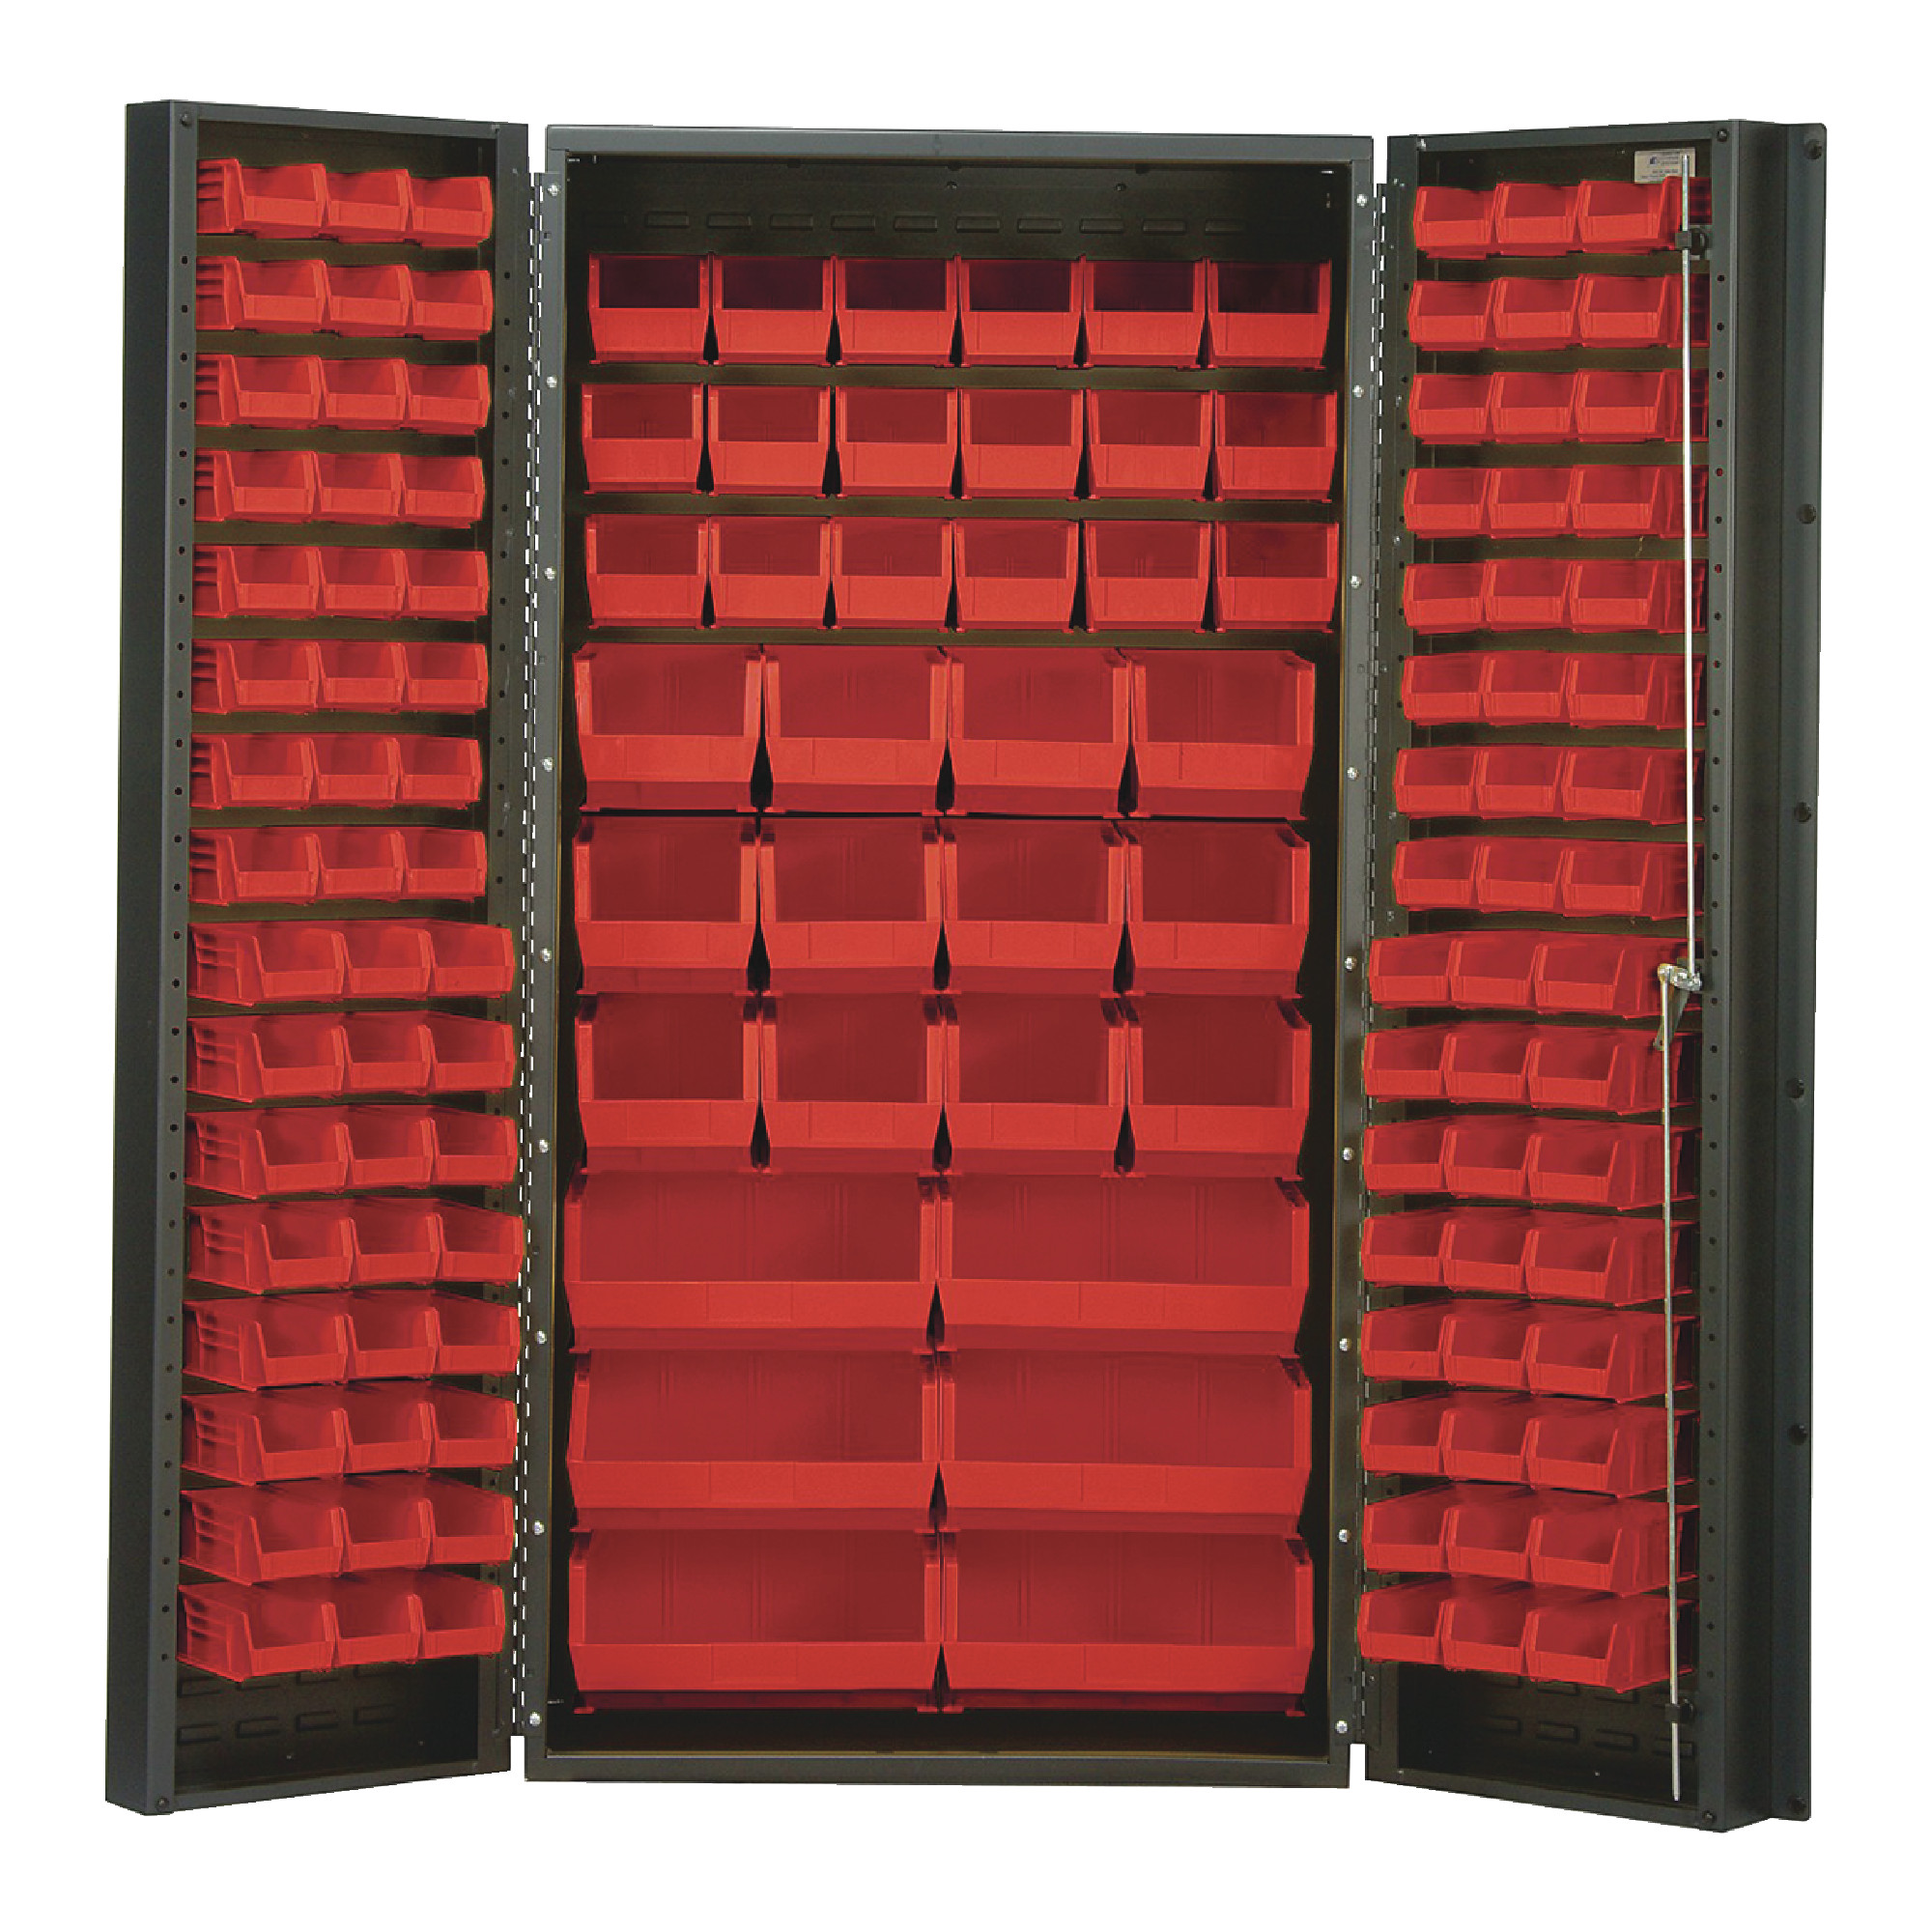 QUANTUM STORAGE SYSTEMS 36" Wide All Welded Floor Cabinet With 132 Red Bins